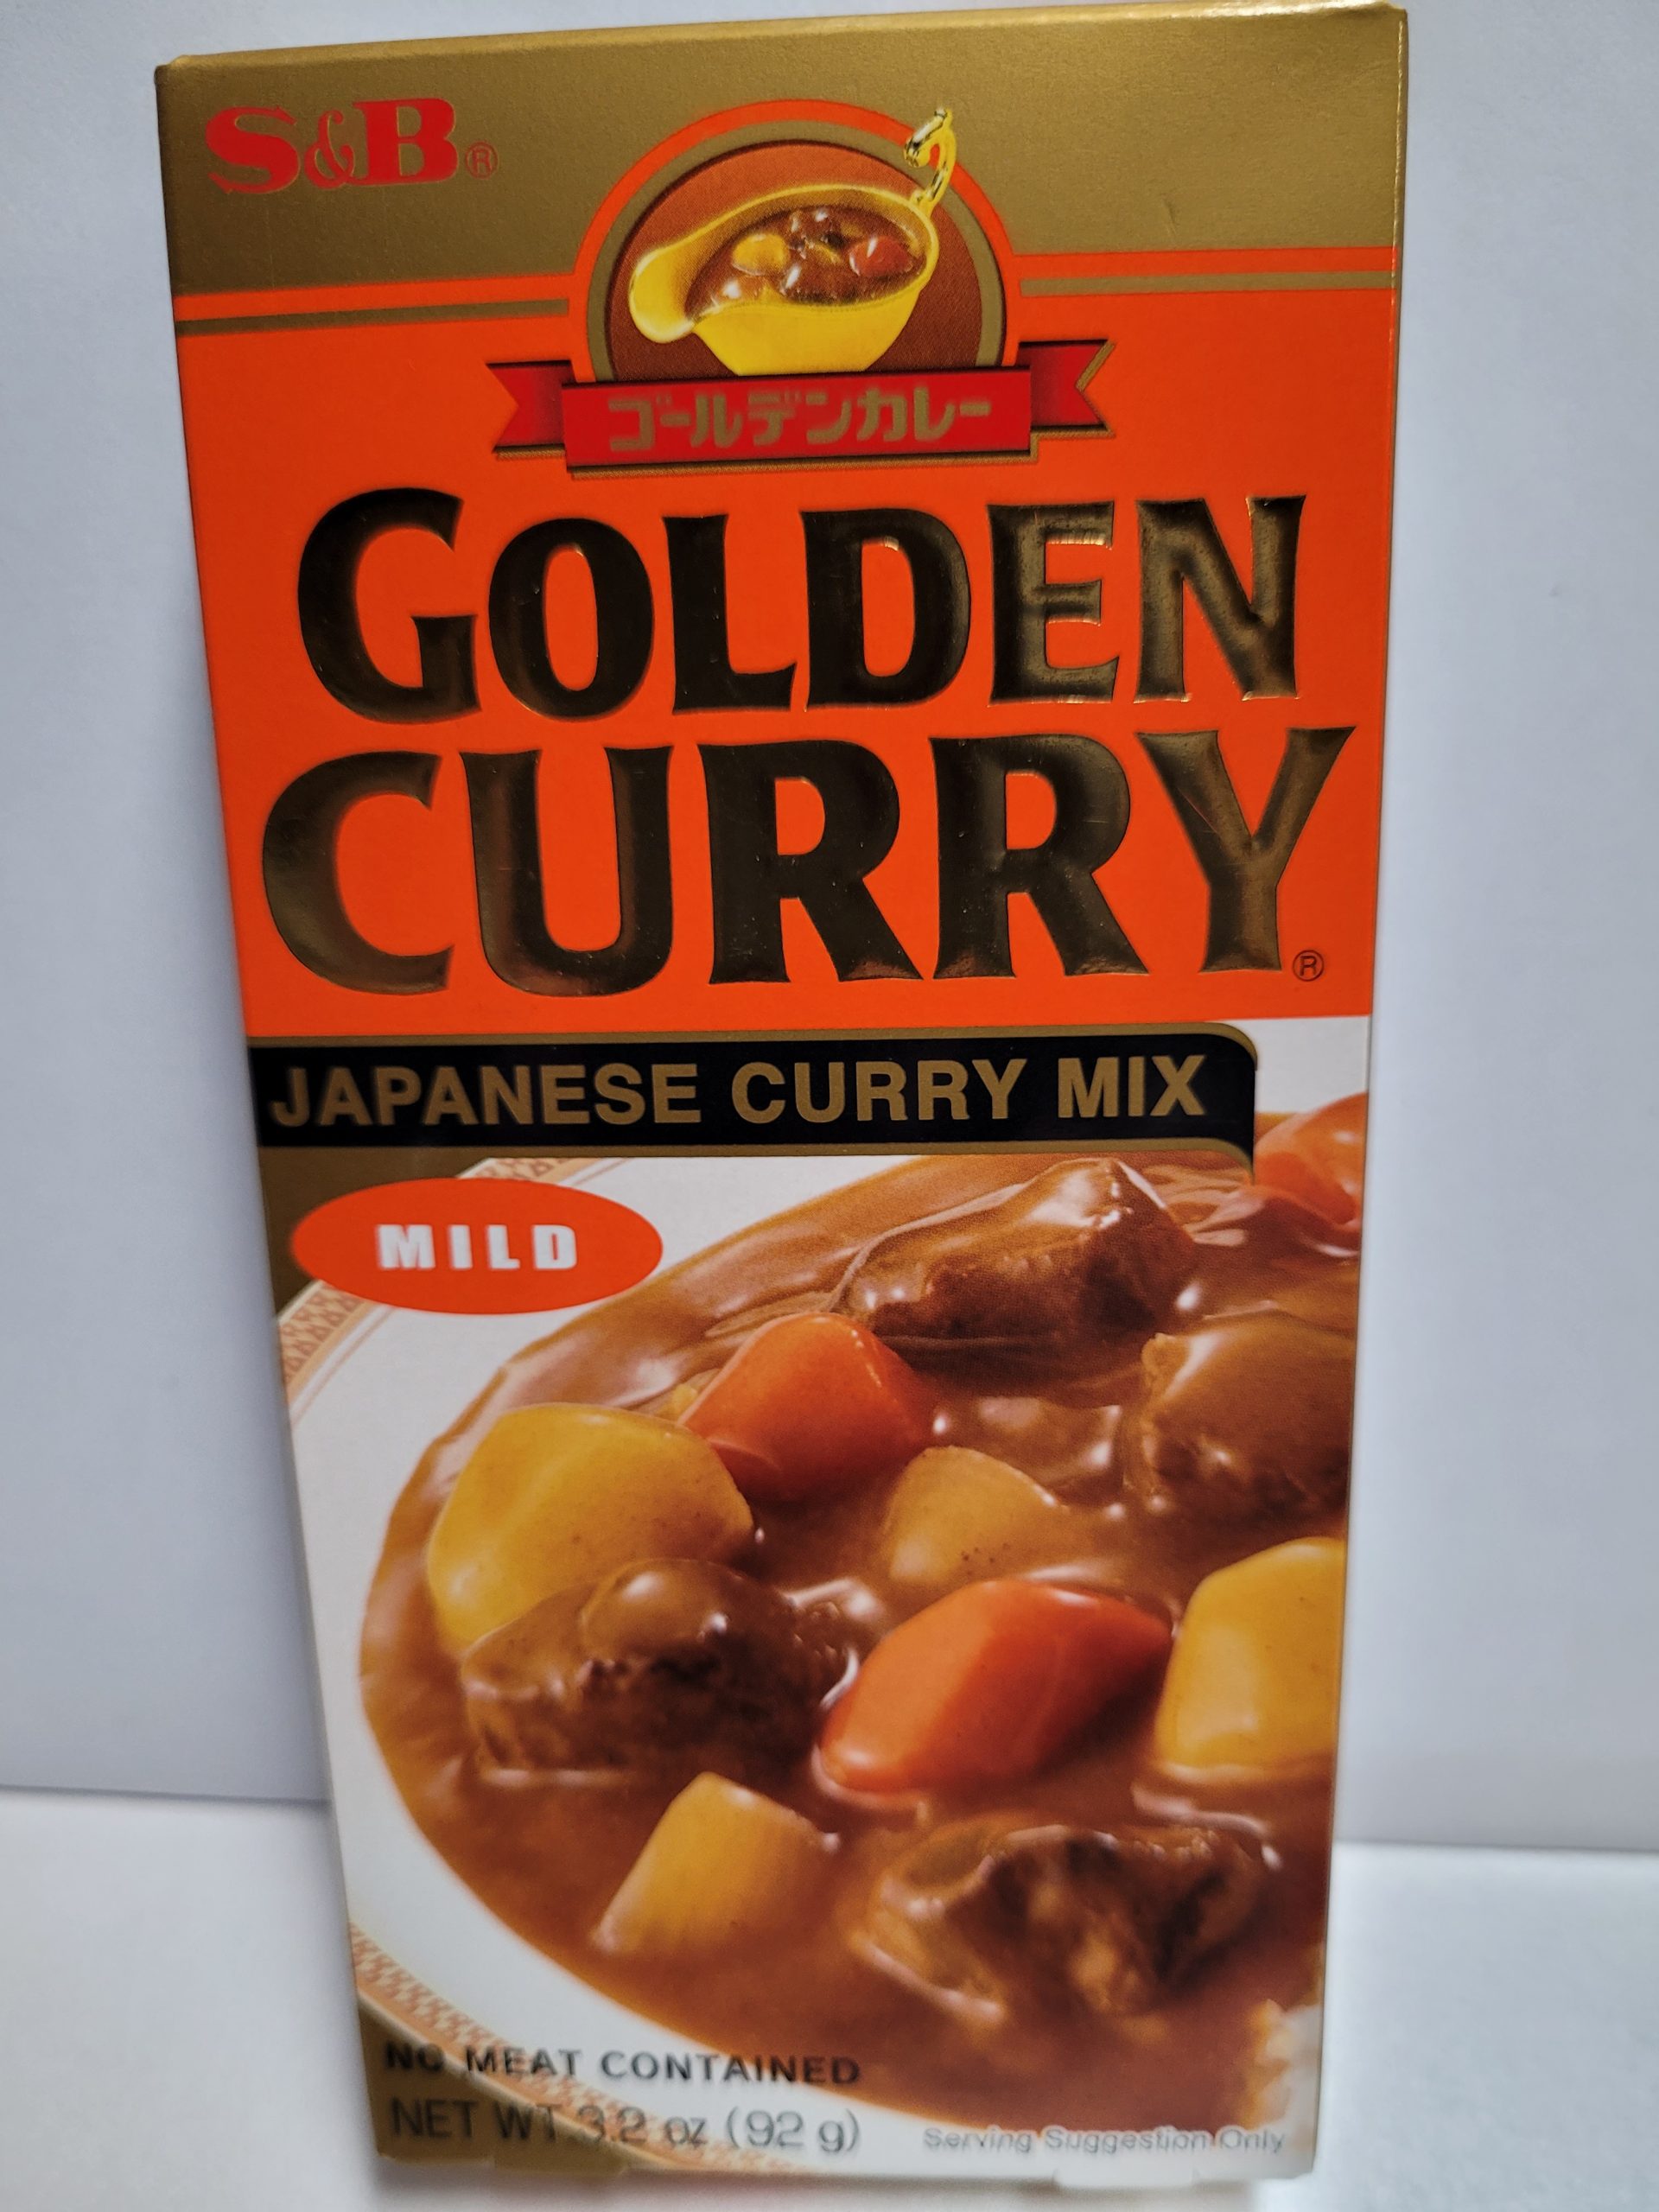 GOLDEN CURRY JAPONESE CURRY MIX IN BLOCK MILD 90g